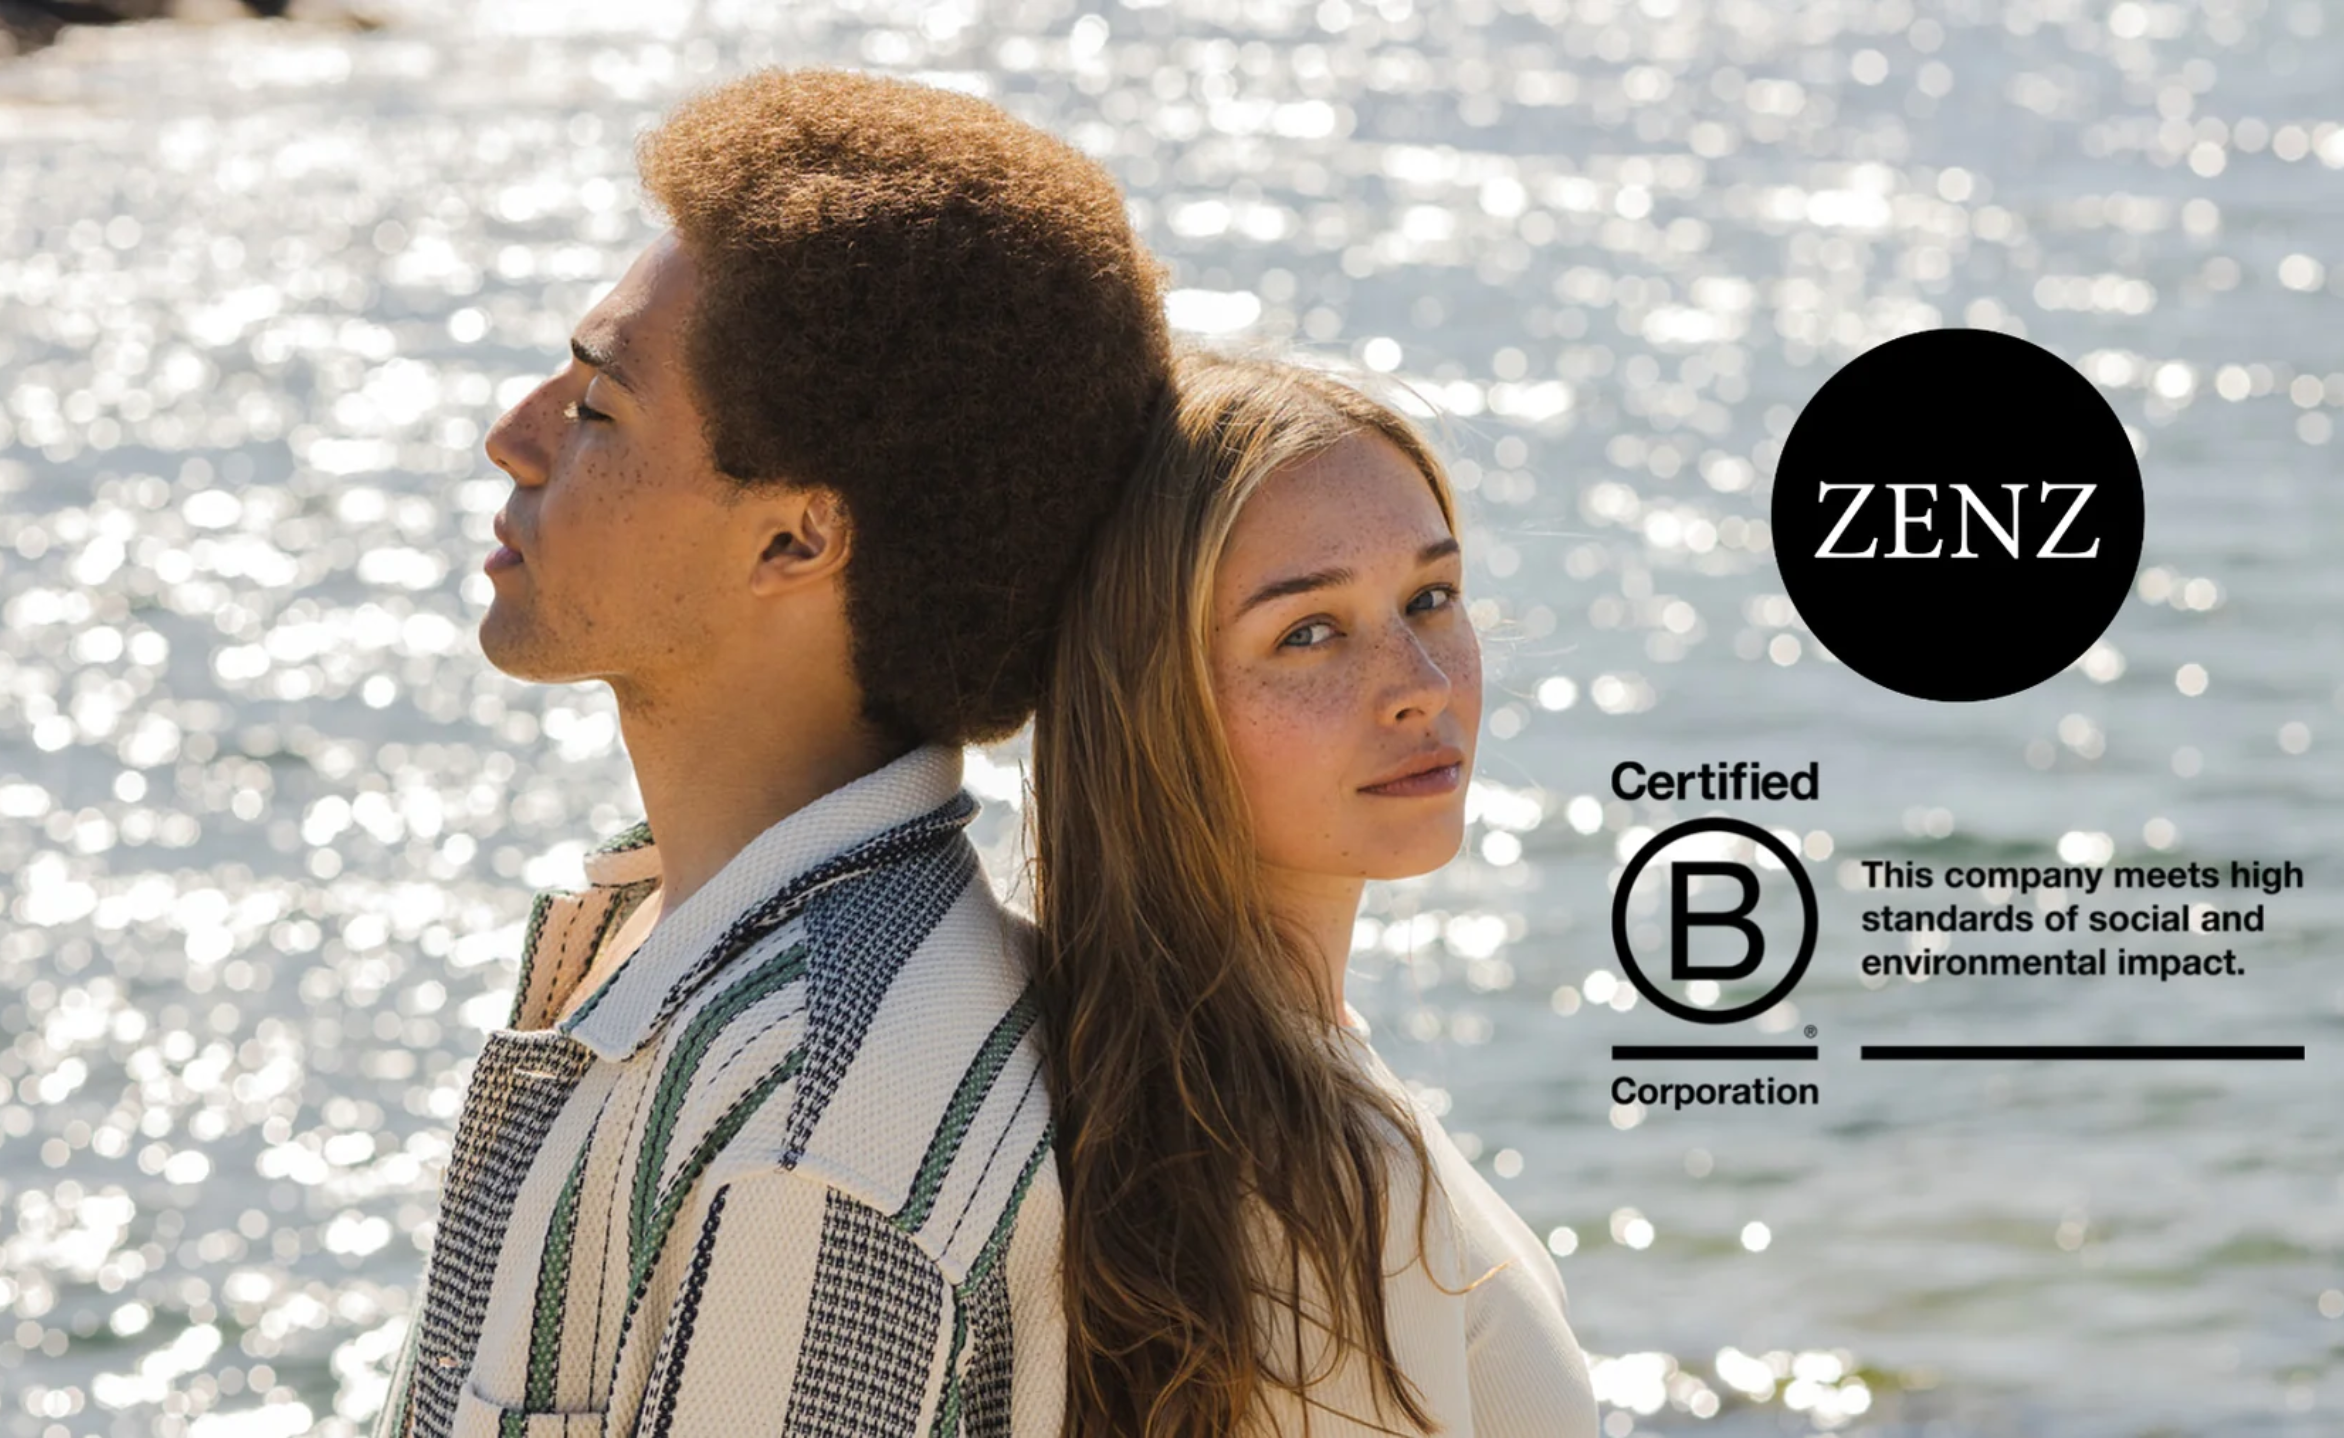 ZENZ is officially B-corp certified to meet high standarts regarding accountability, transparency and results